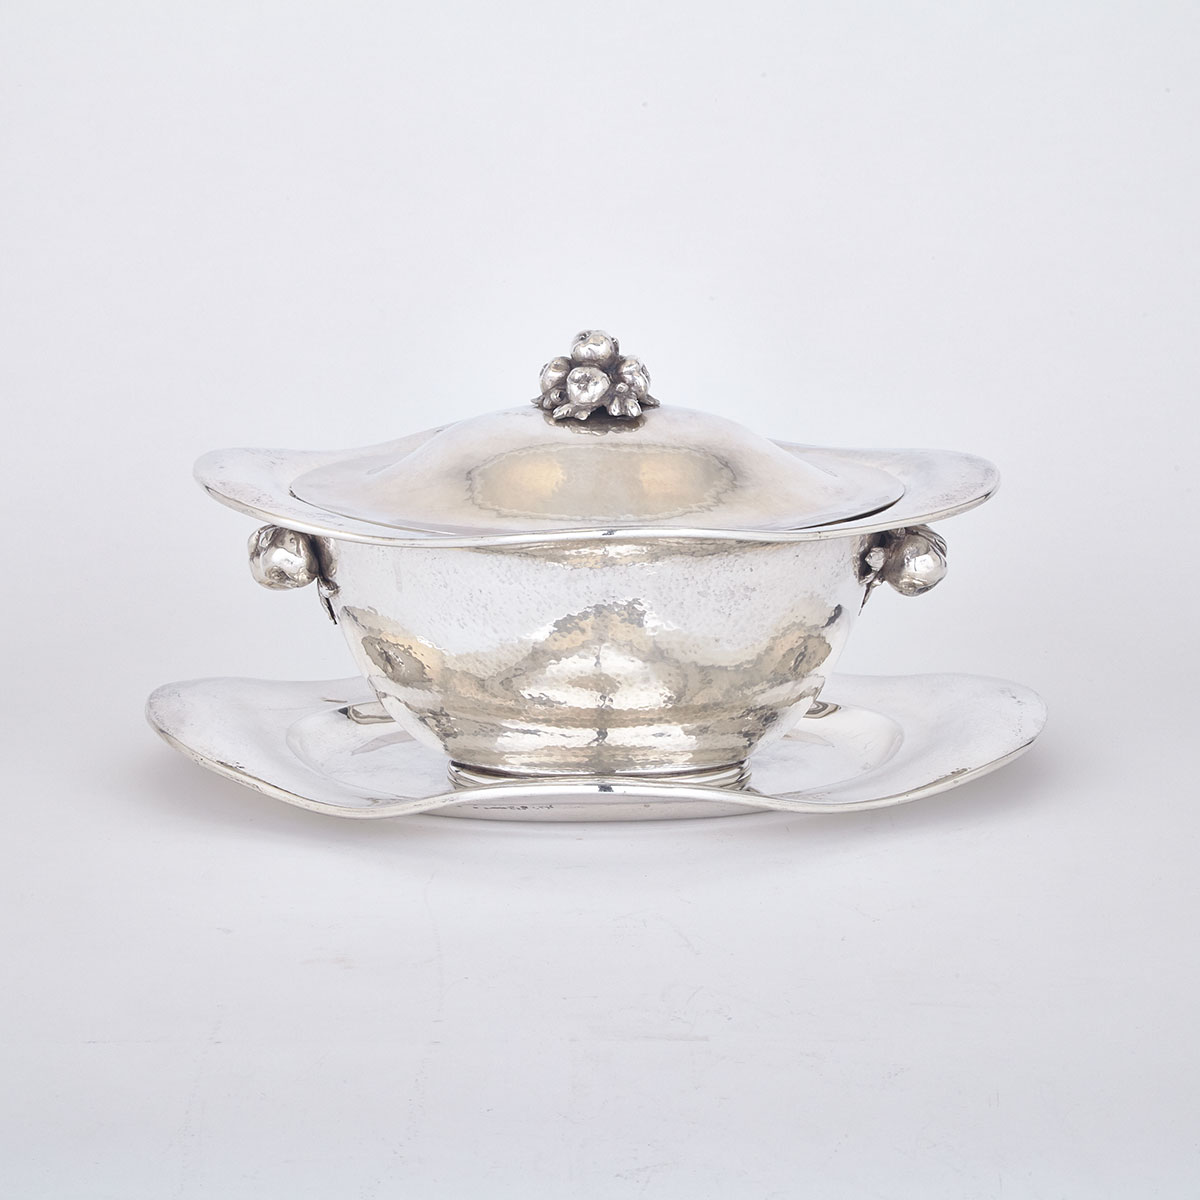 Italian Silver Covered Tureen and Stand, 20th century